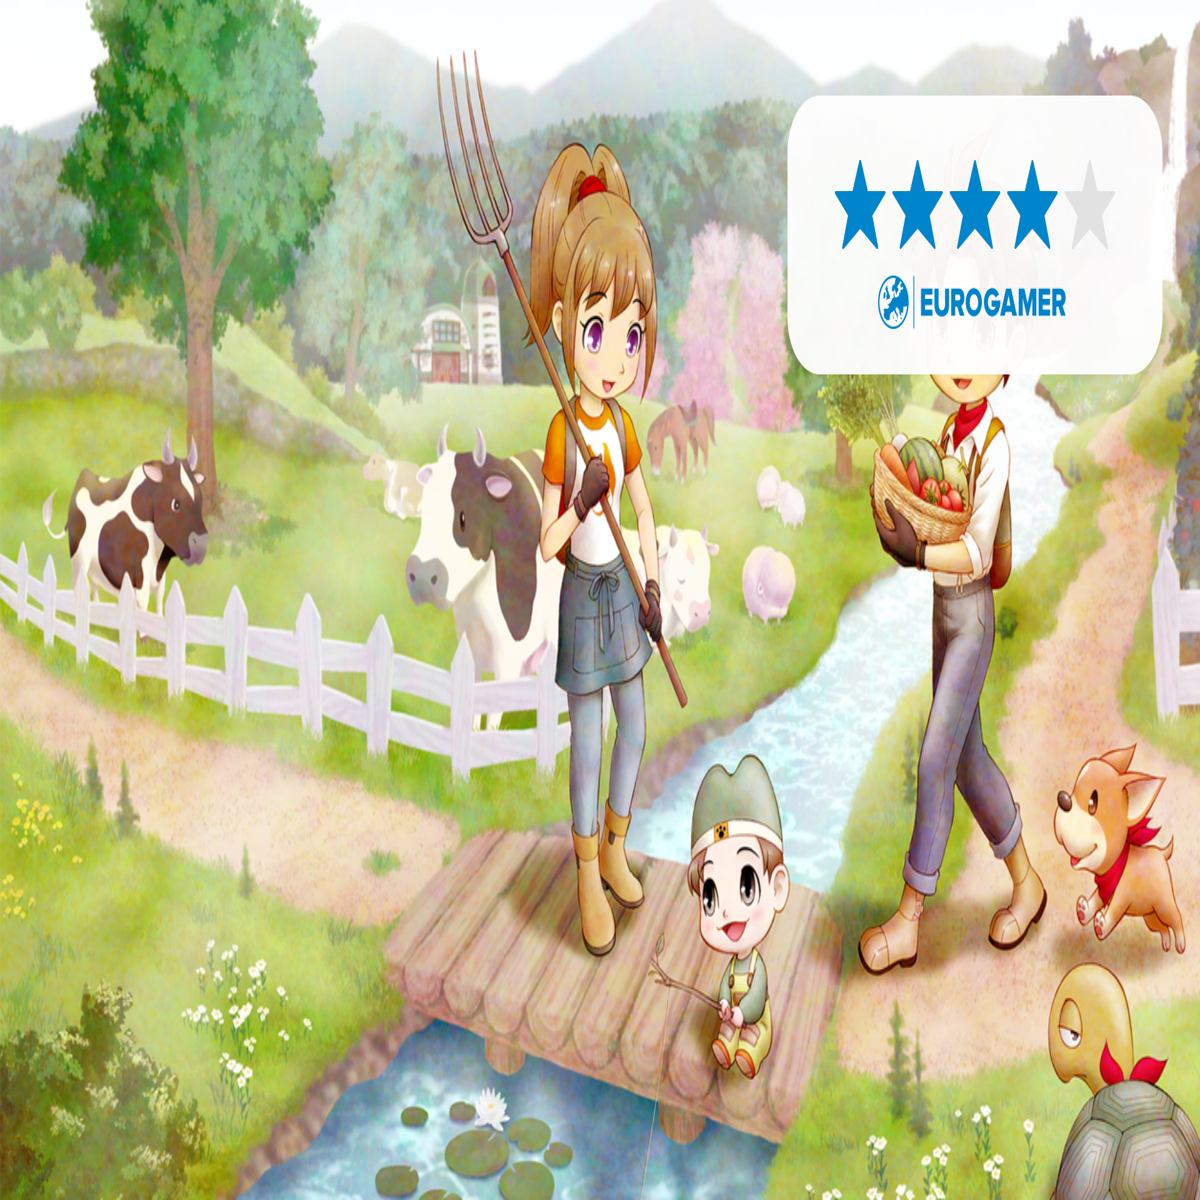 Play Play to Ps2 Games Online Free No Download Harvestmoon Games